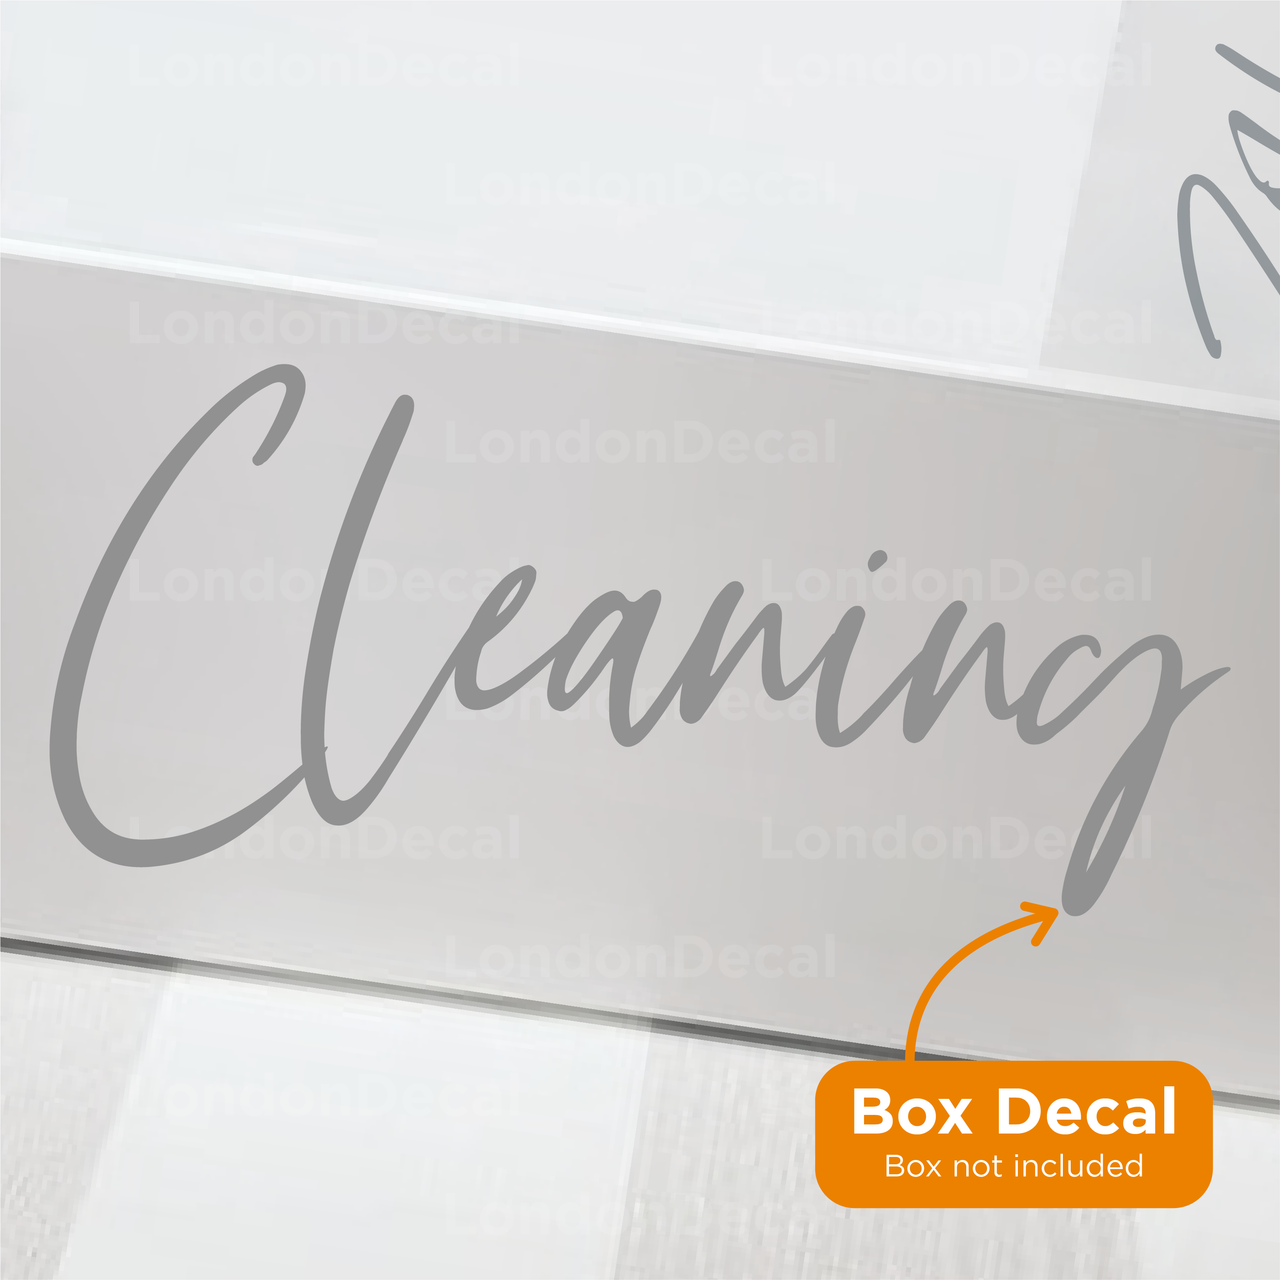 Cleaning - Mrs Hinch Inspired Decals (Type 2)